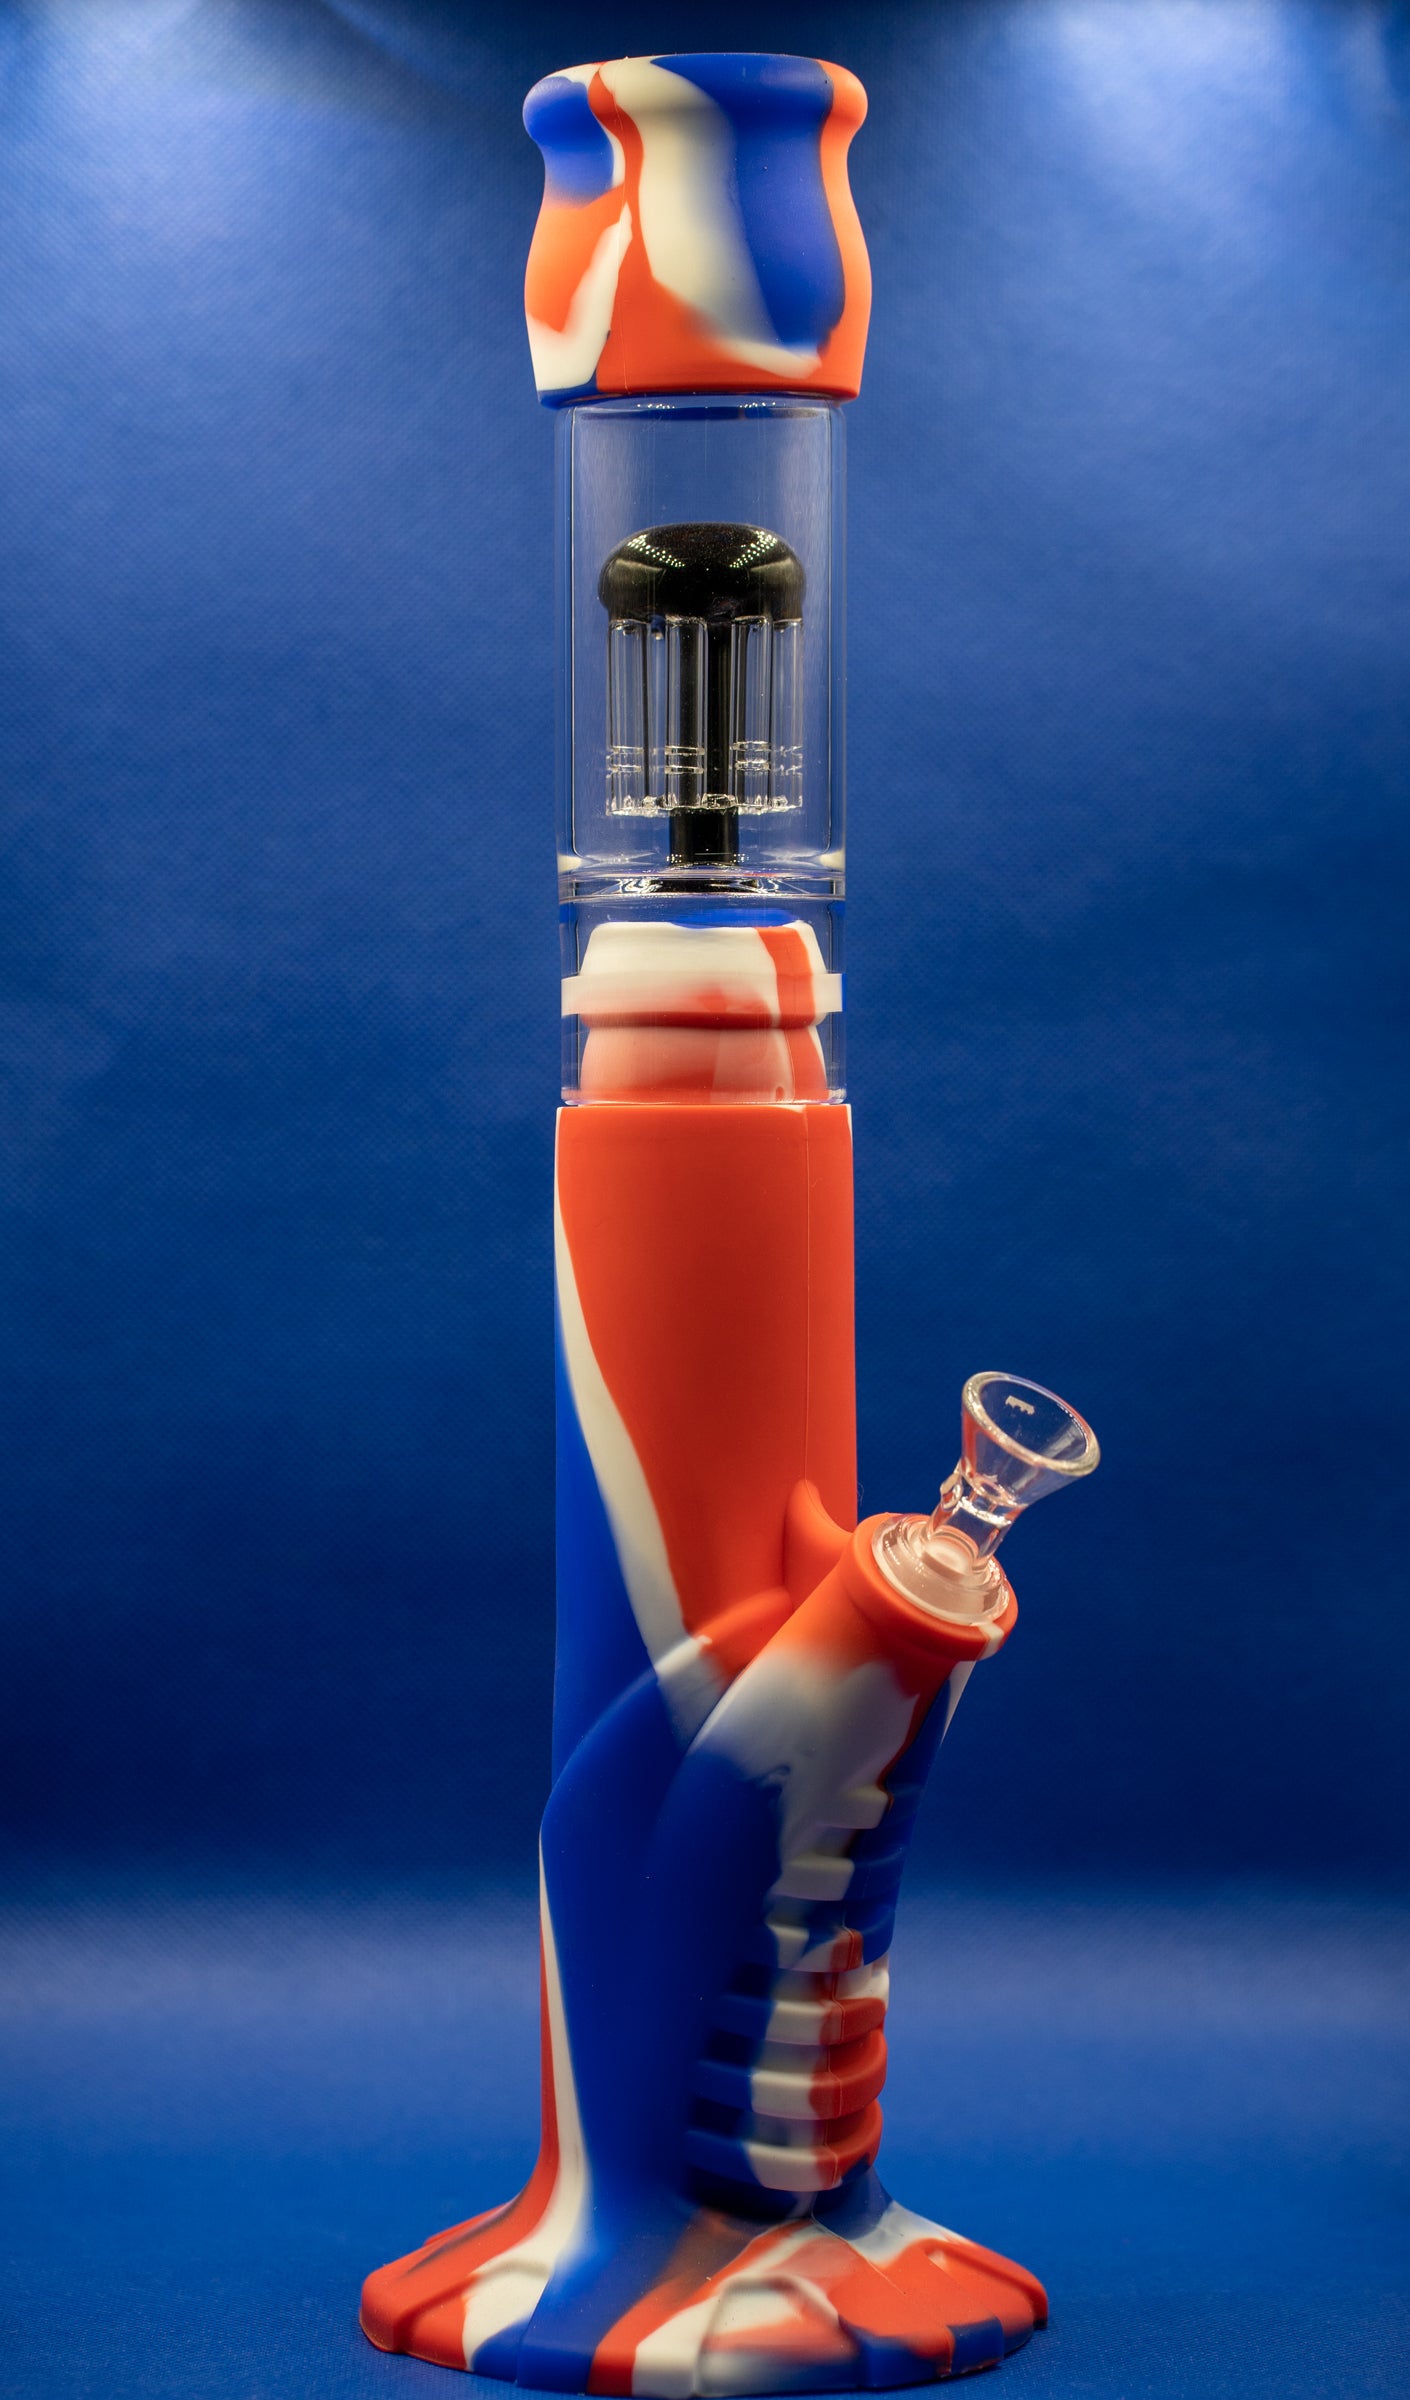 Bong, made from silicon with double filtration